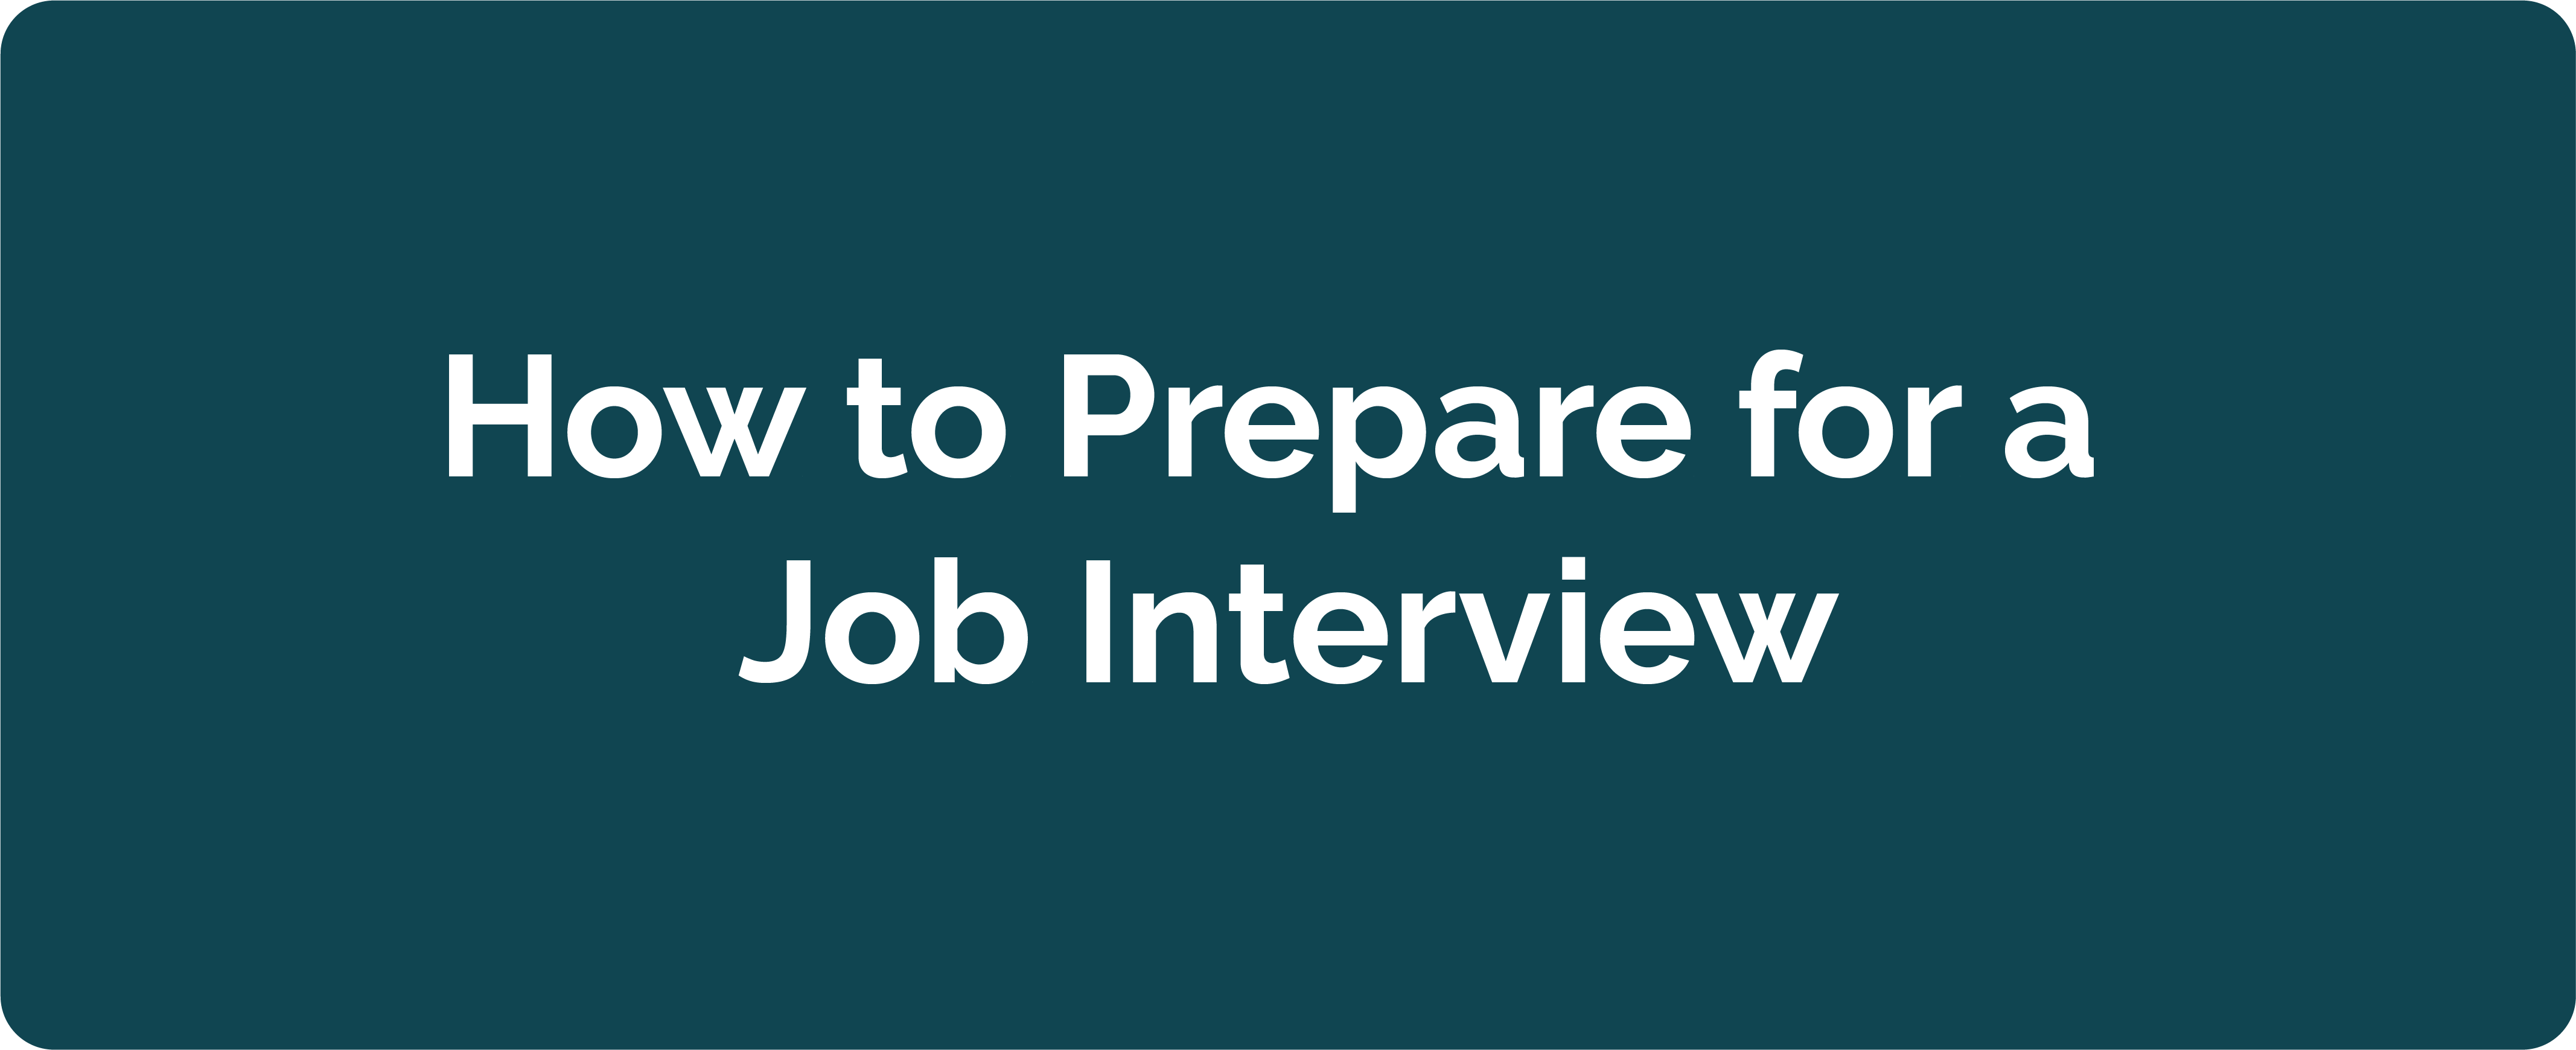 How to Prepare for a Job Interview